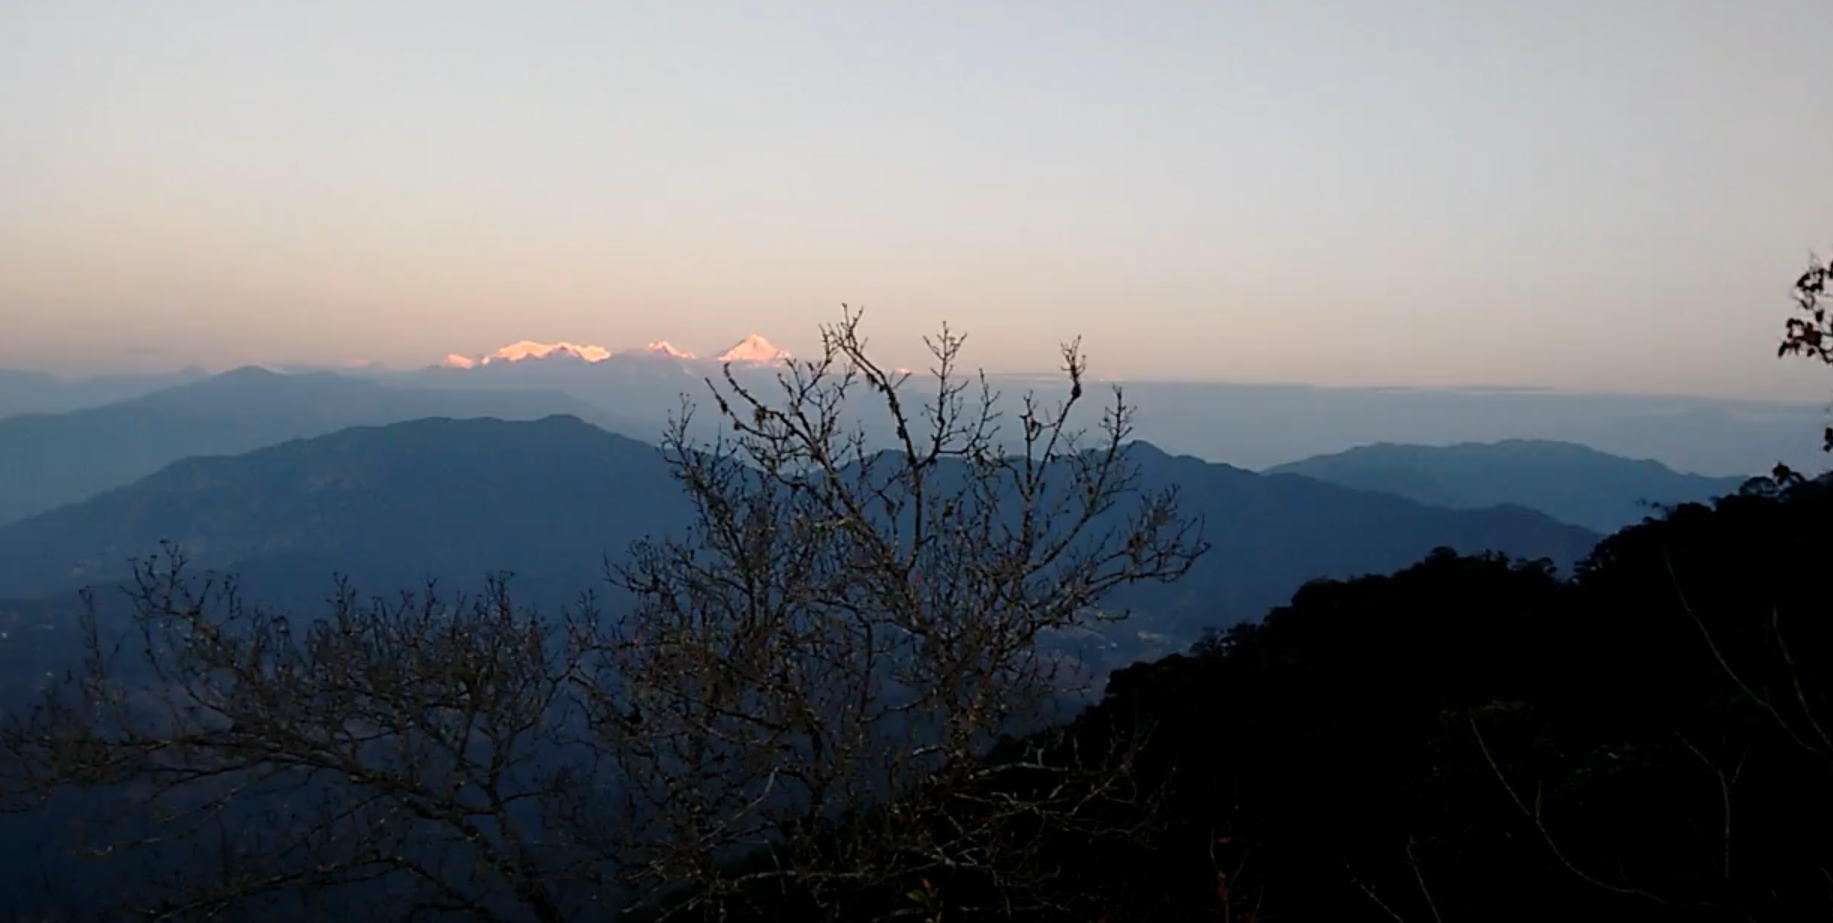 The middle peak is the Kanchenjunga